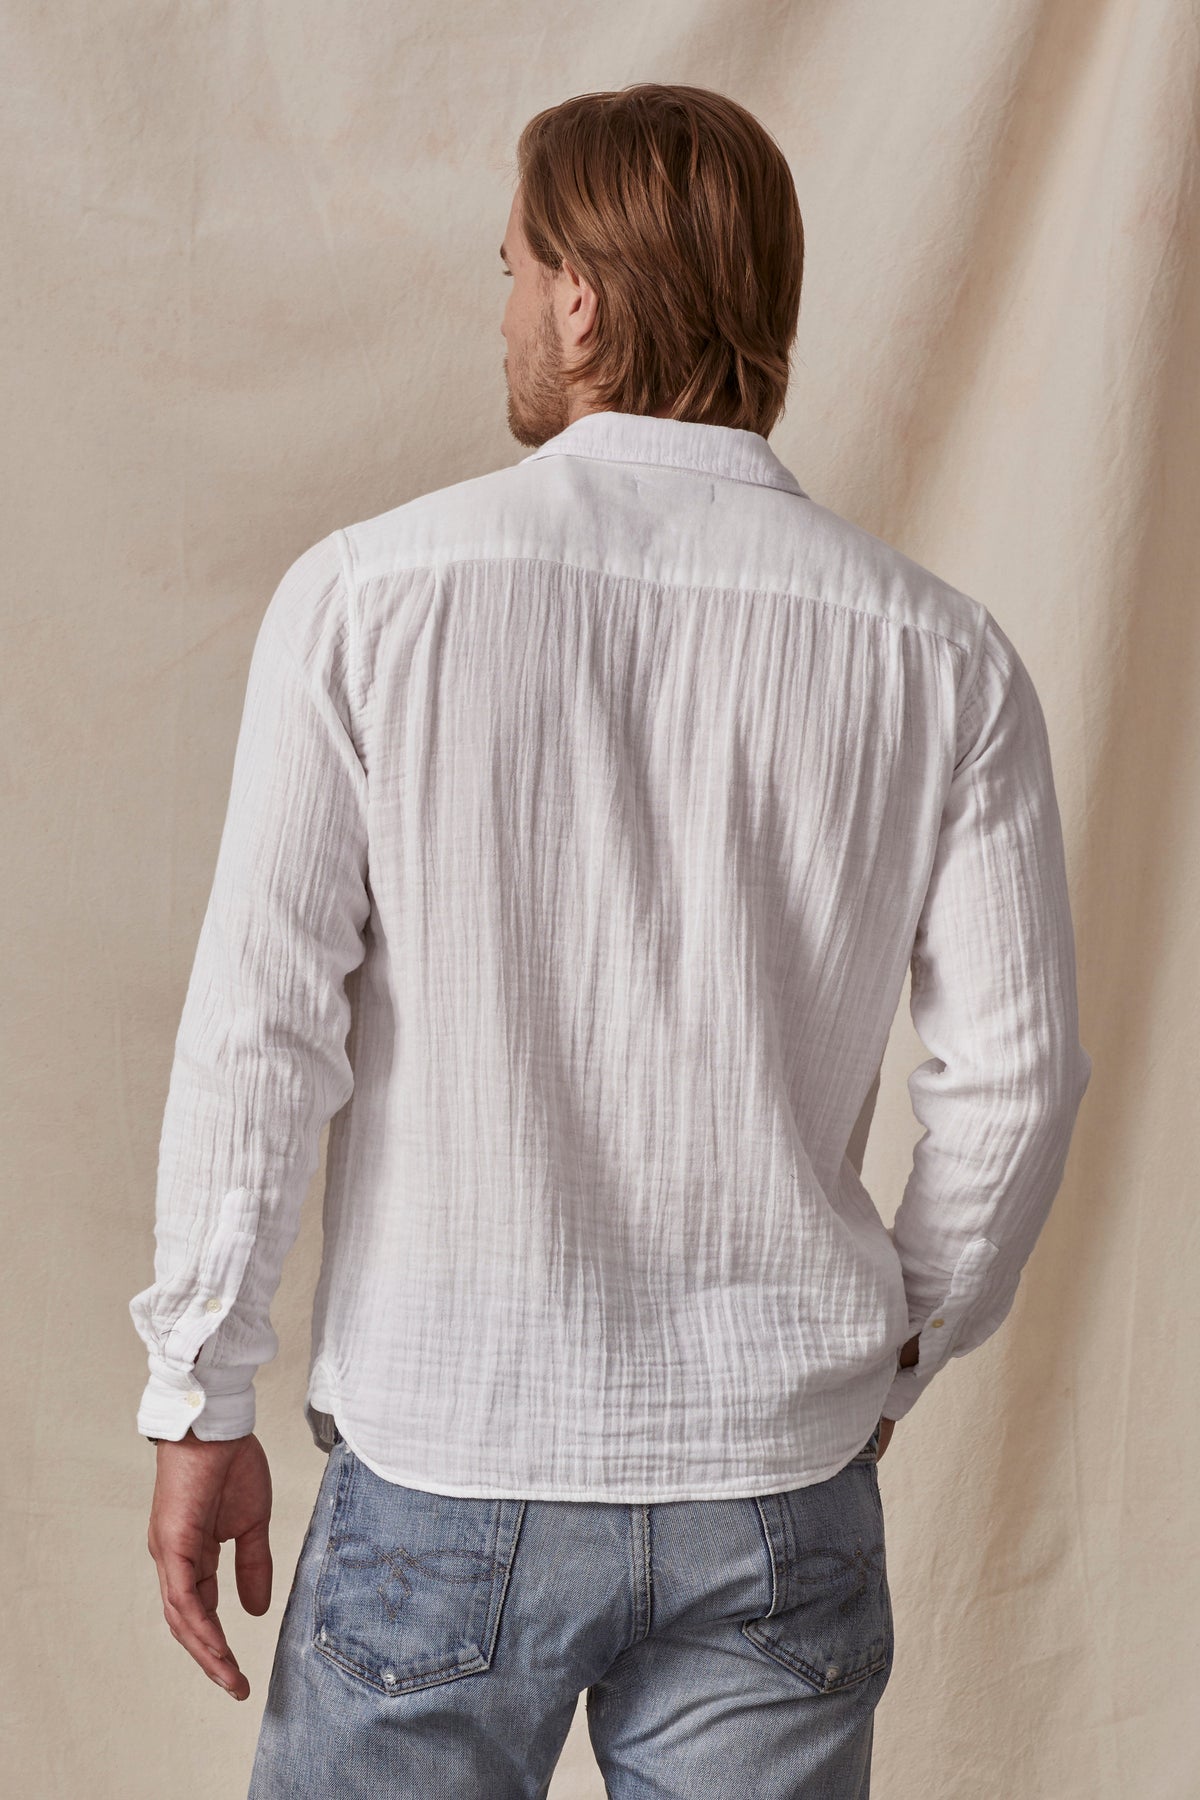   A man viewed from the back, wearing a Velvet by Graham & Spencer ELTON COTTON GAUZE BUTTON-UP SHIRT and blue jeans, against a neutral beige background. 